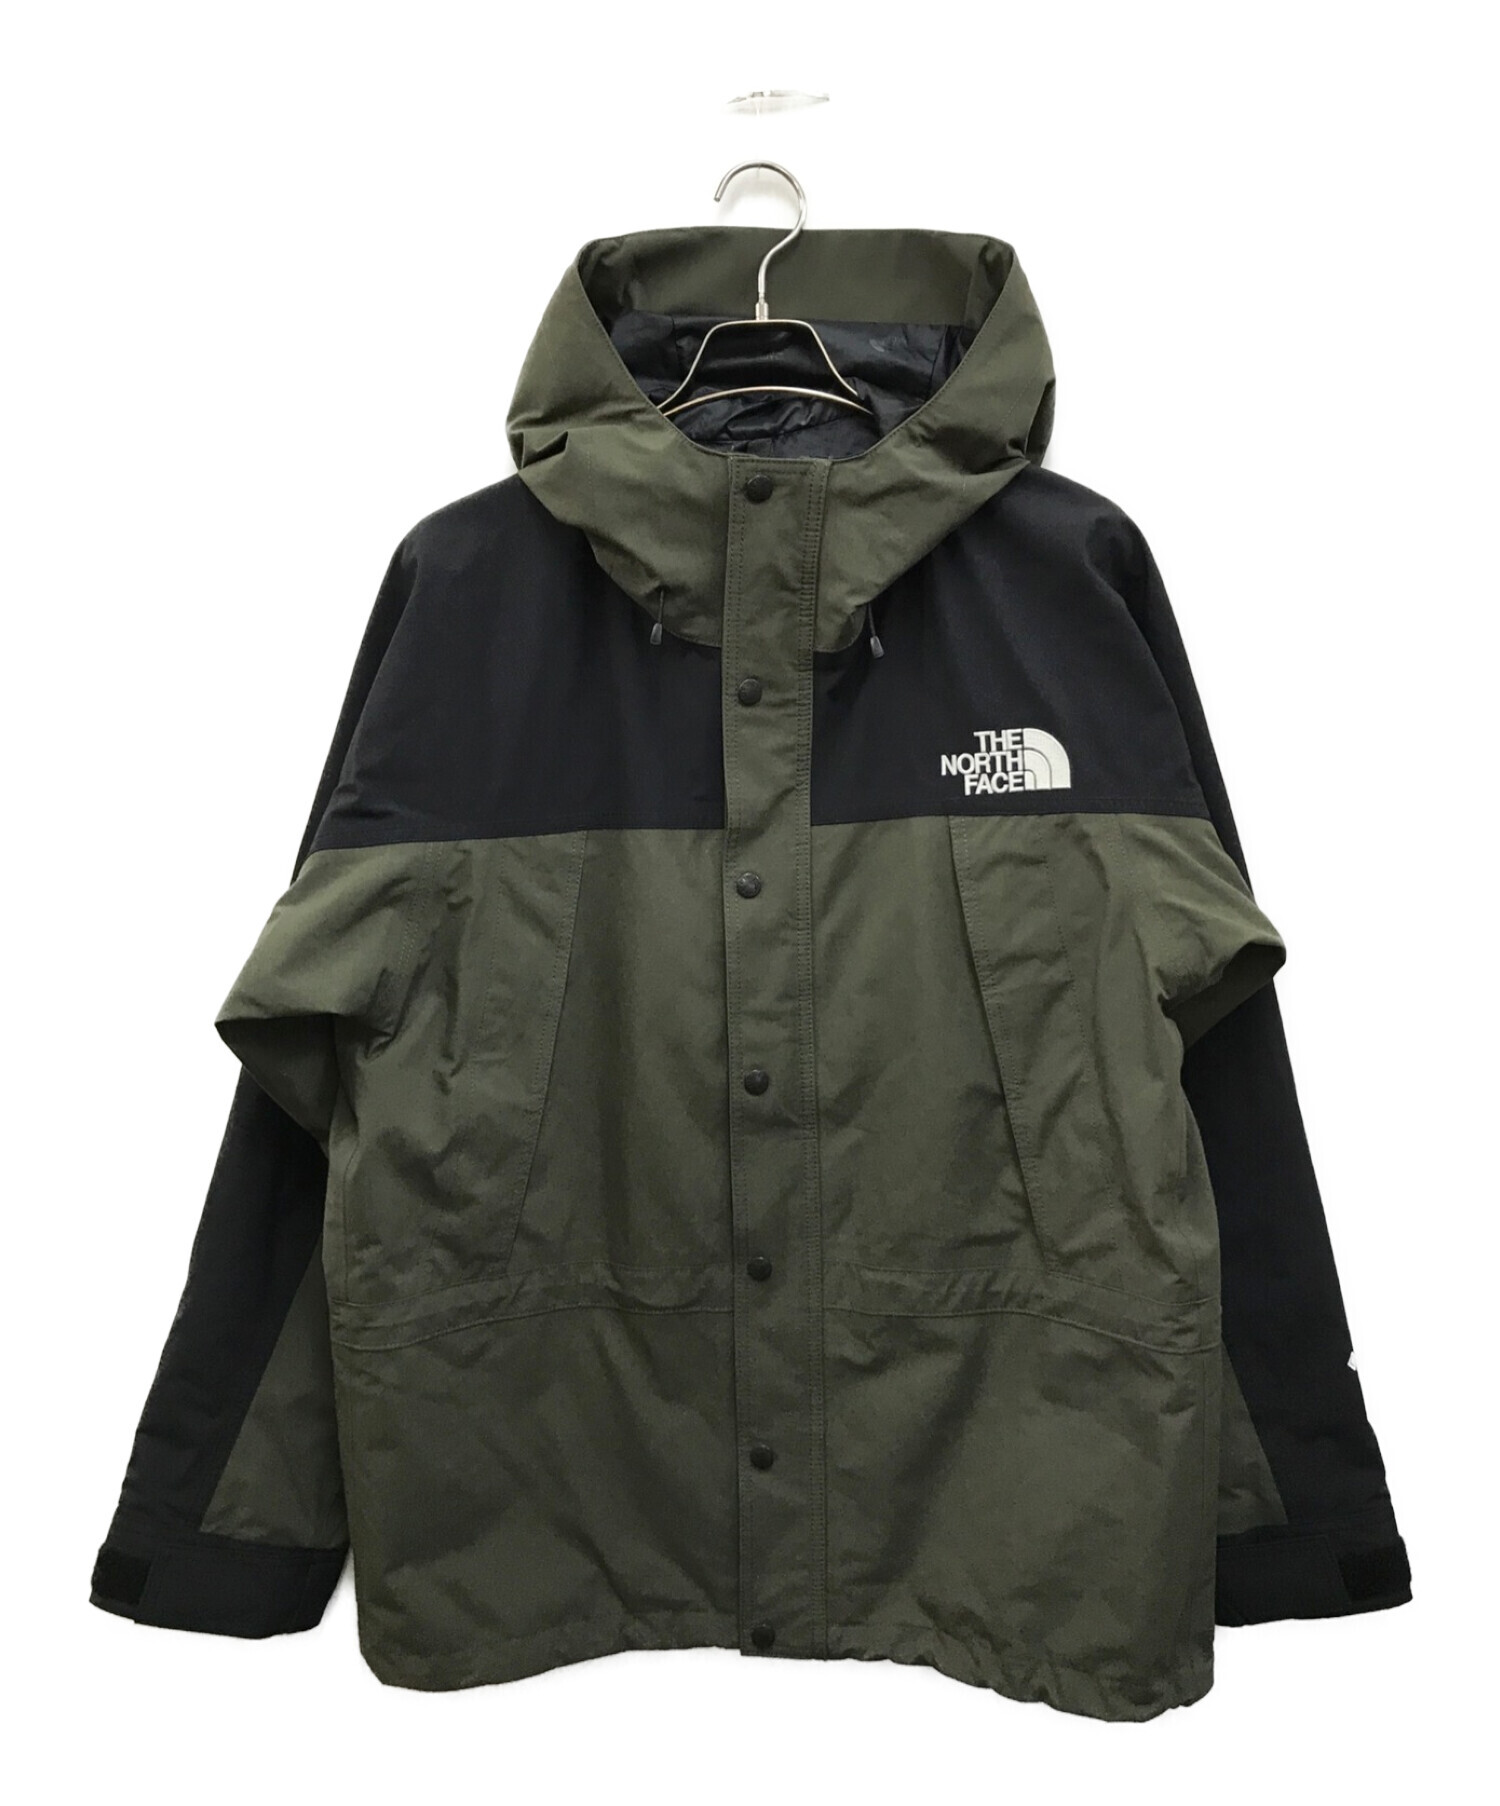 The North Face Mountain Jacket L